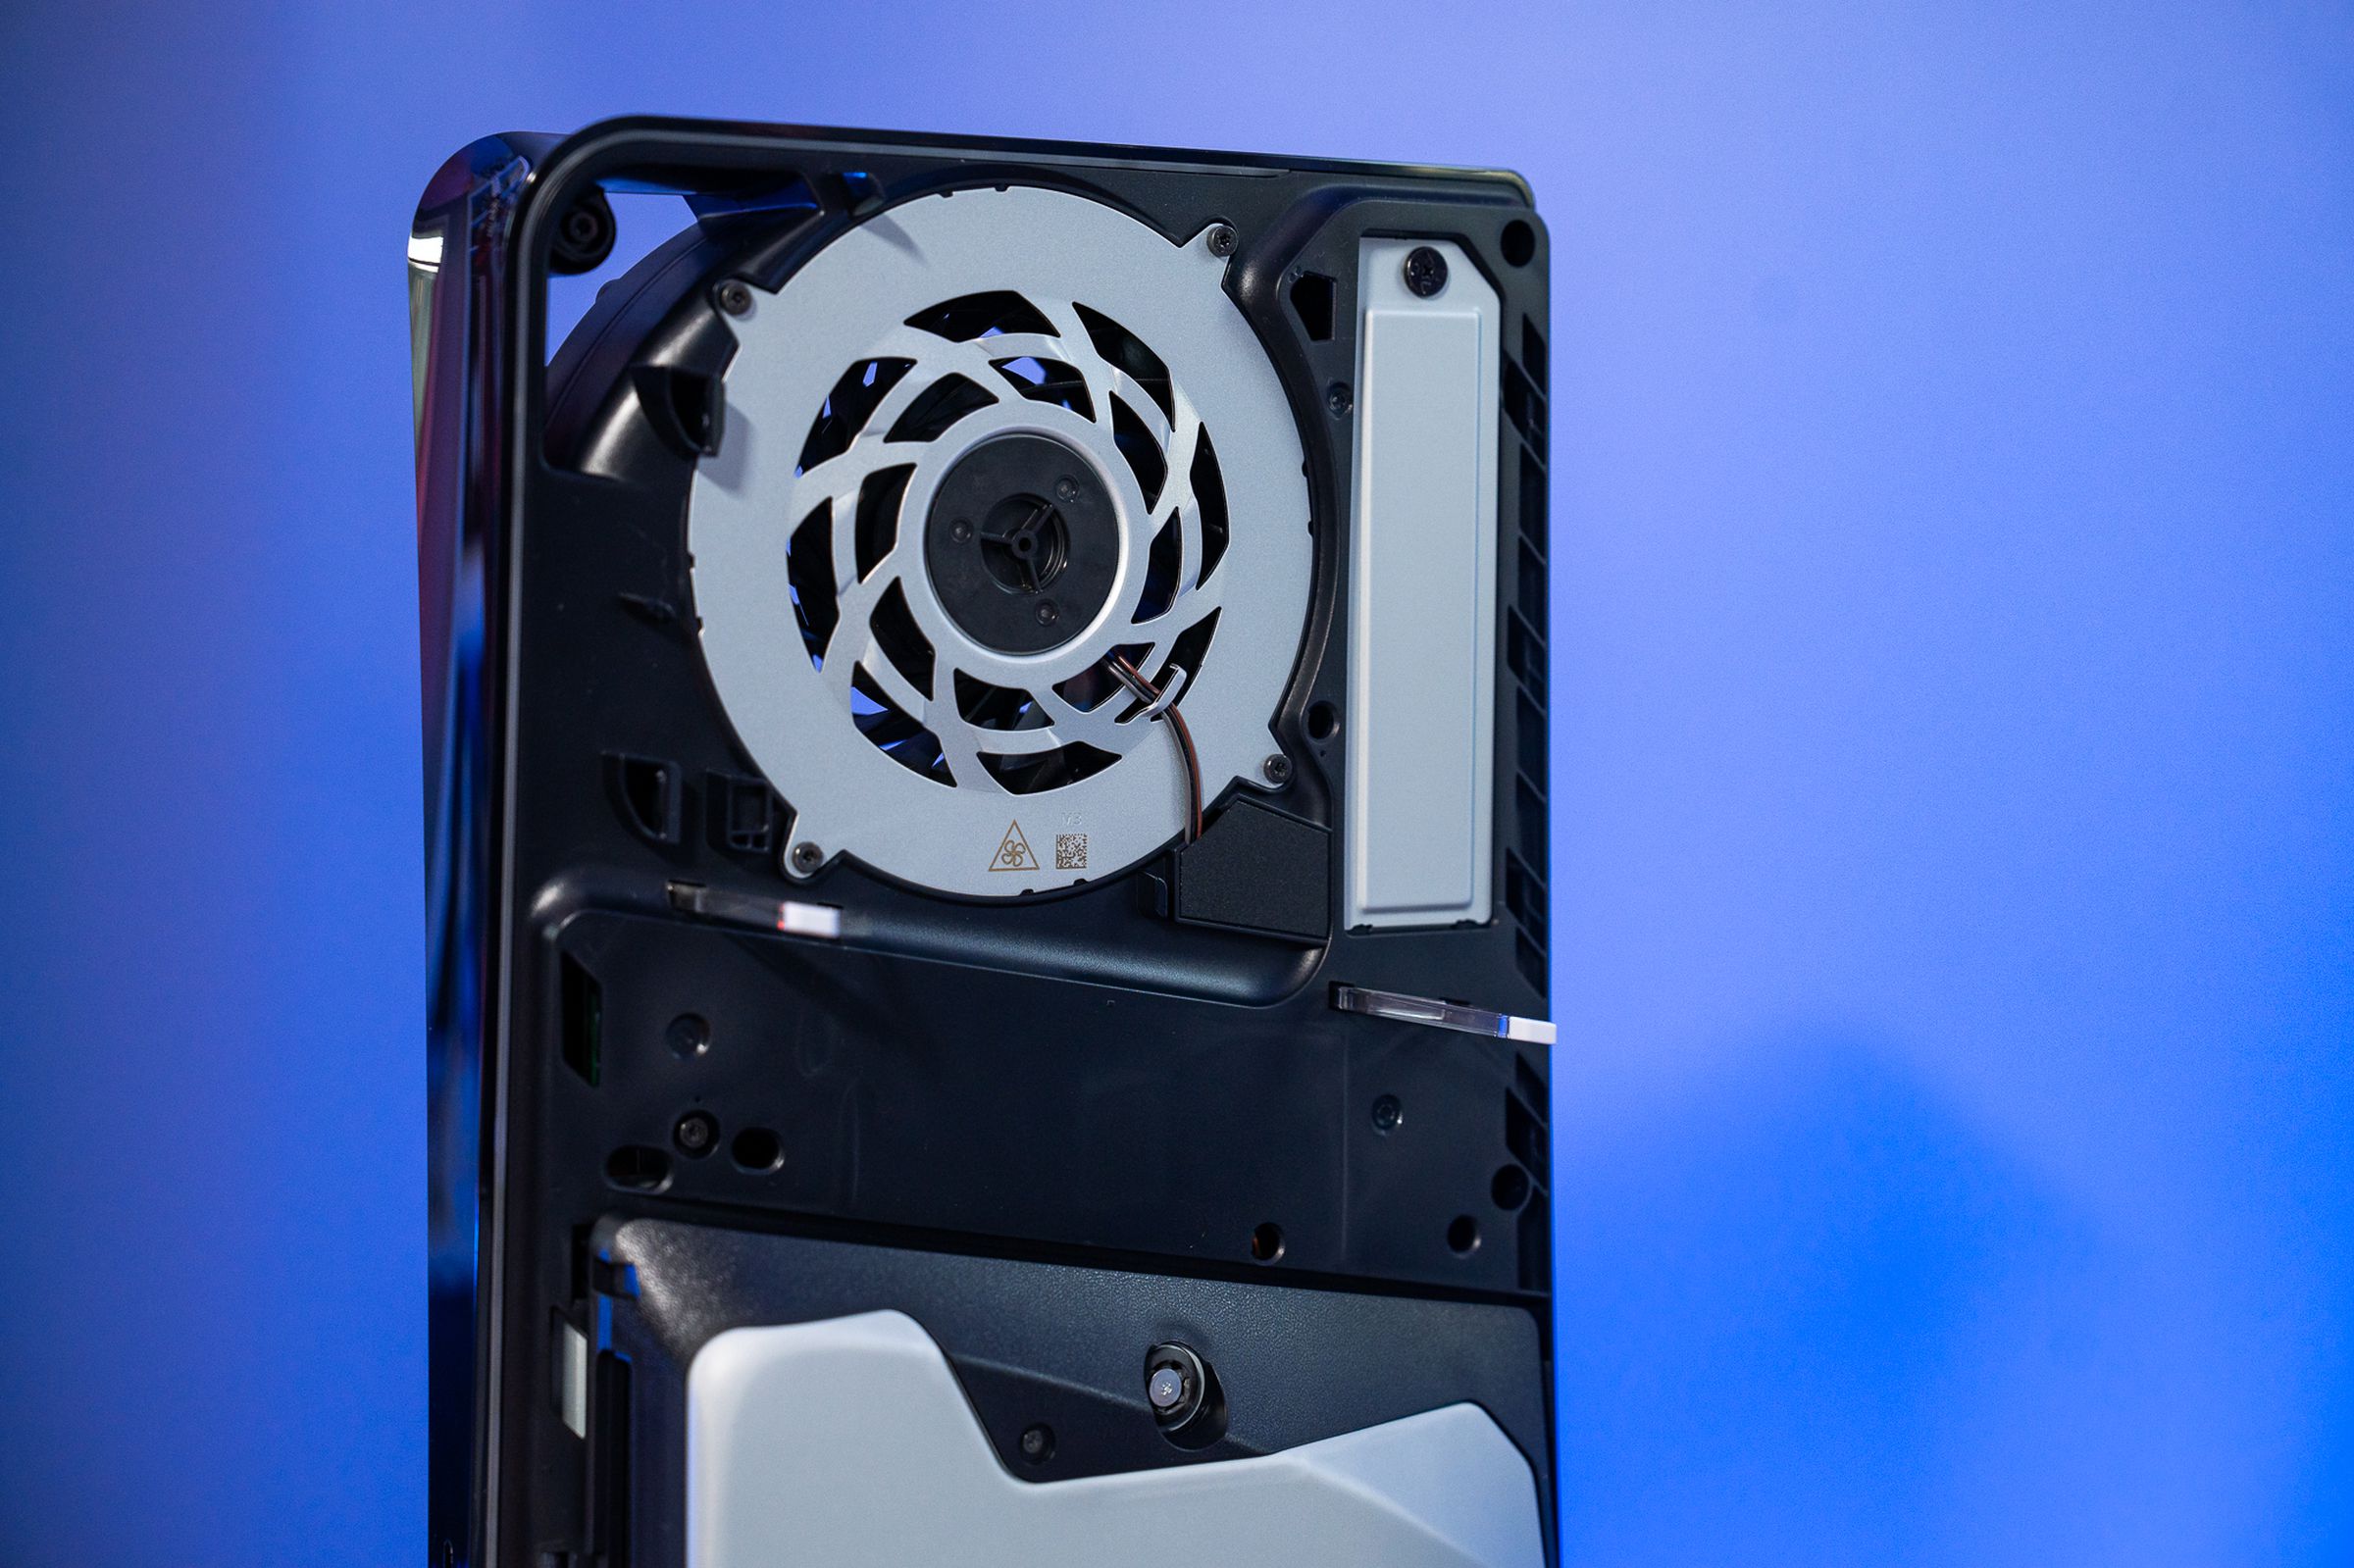 <em>The new PS5’s inner case without any covers attached.</em>